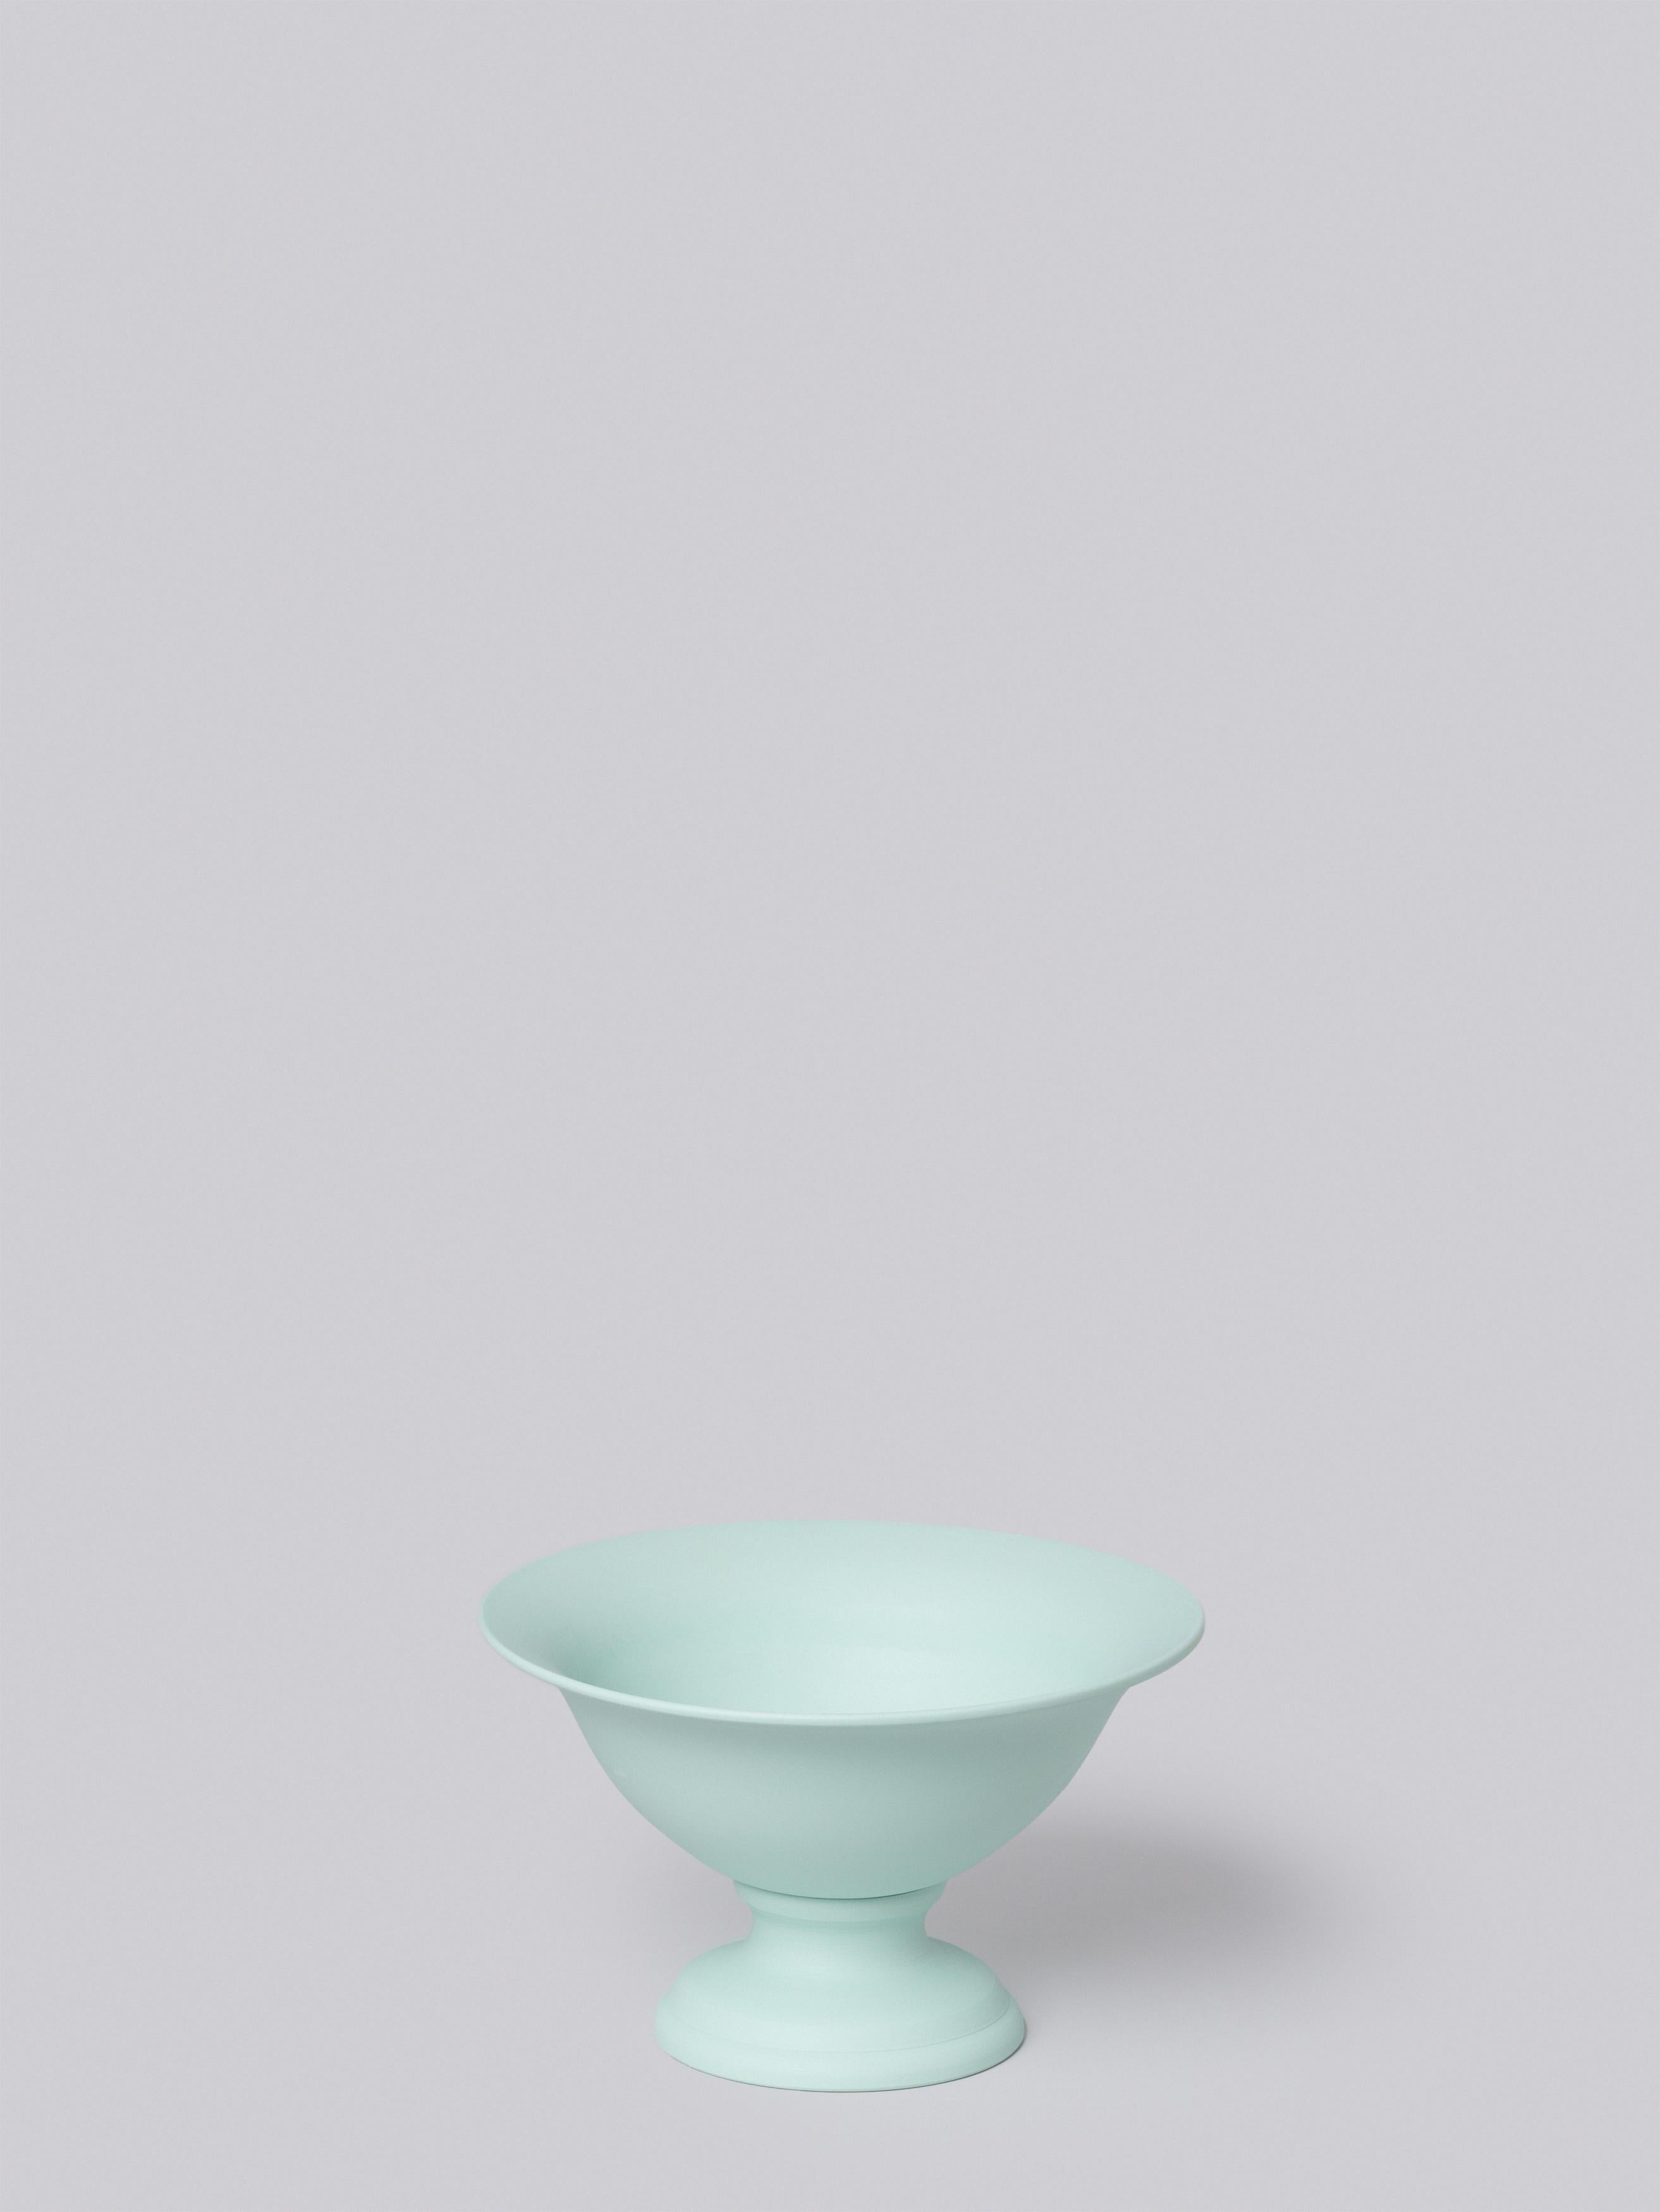 Greco Roman Small Footed Porcelain Vaso Planter in Matte Mint Green